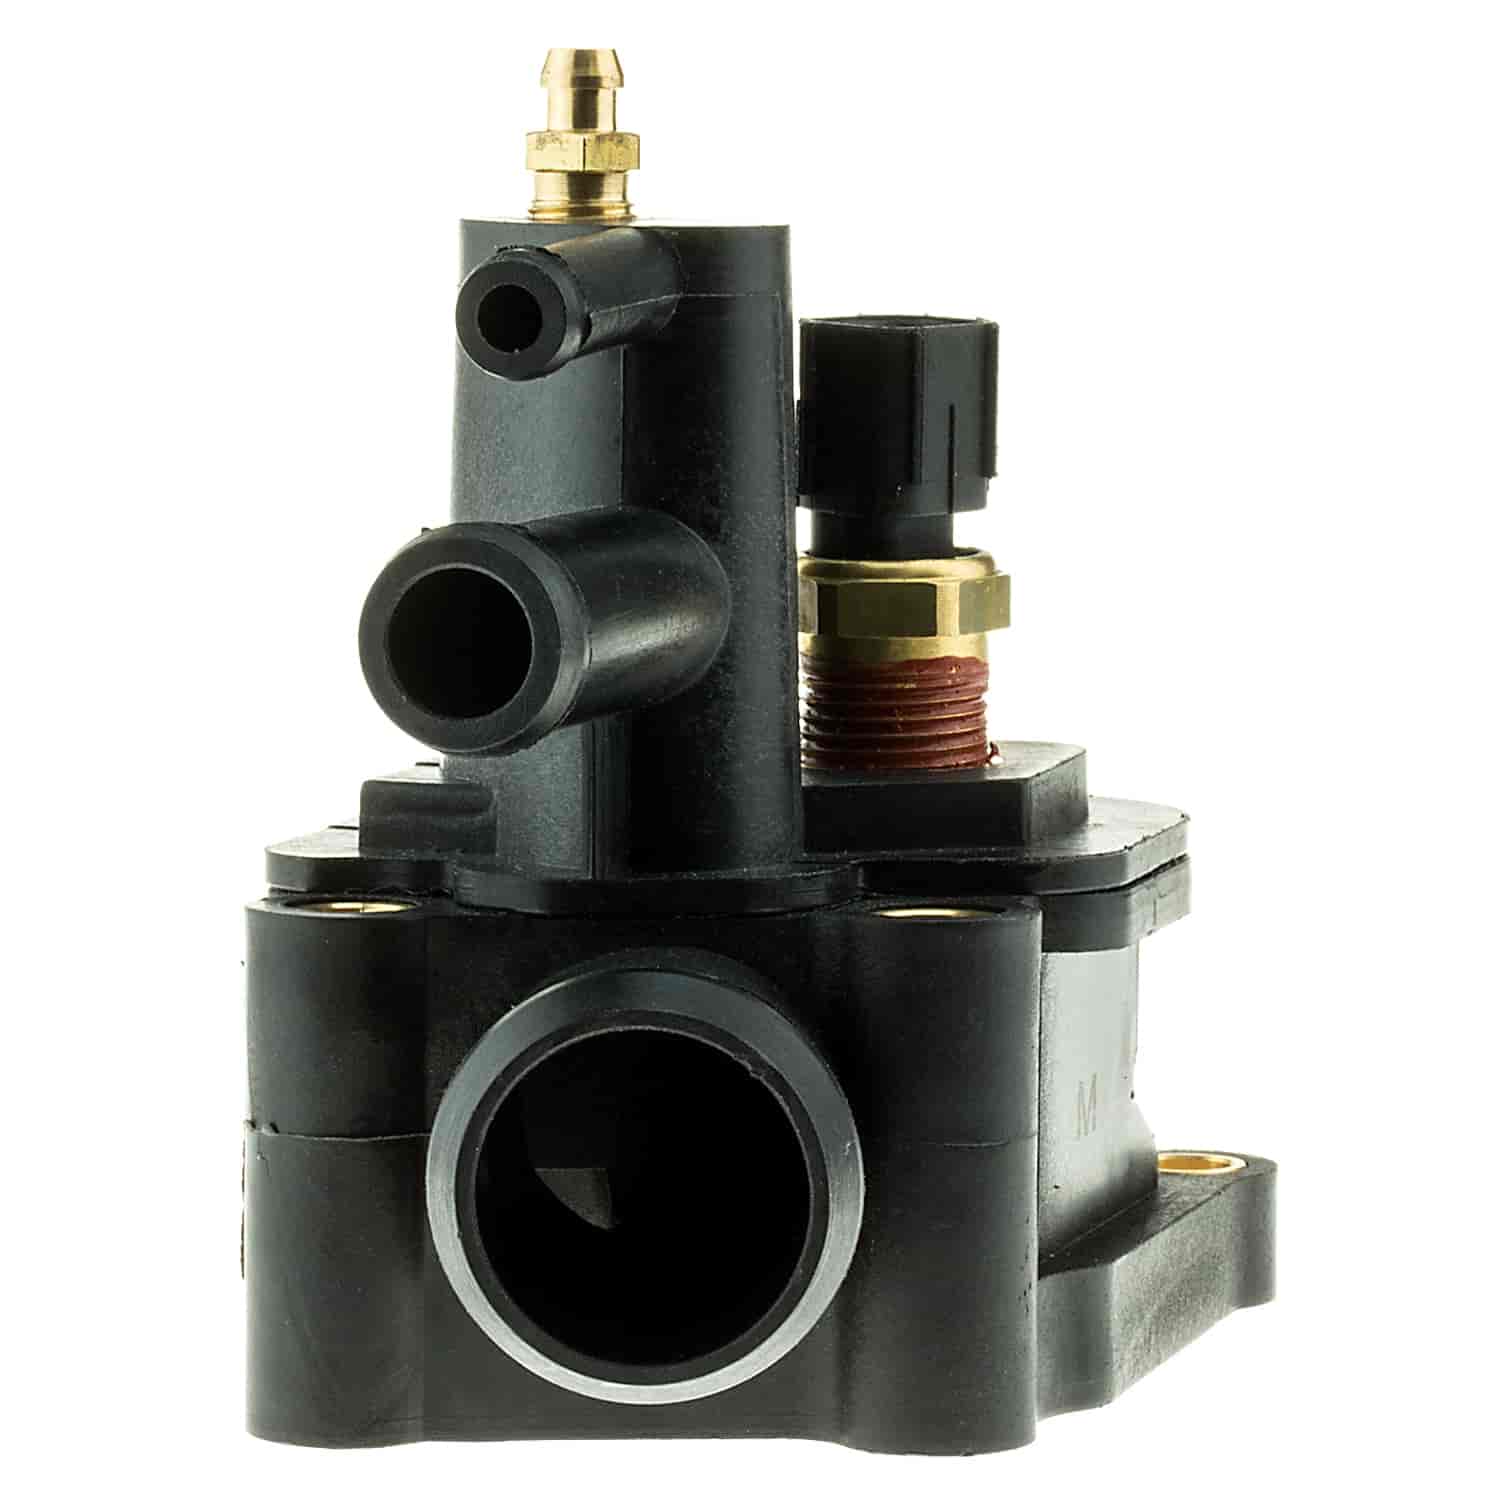 COOLANT OUTLET THERMOSTAT